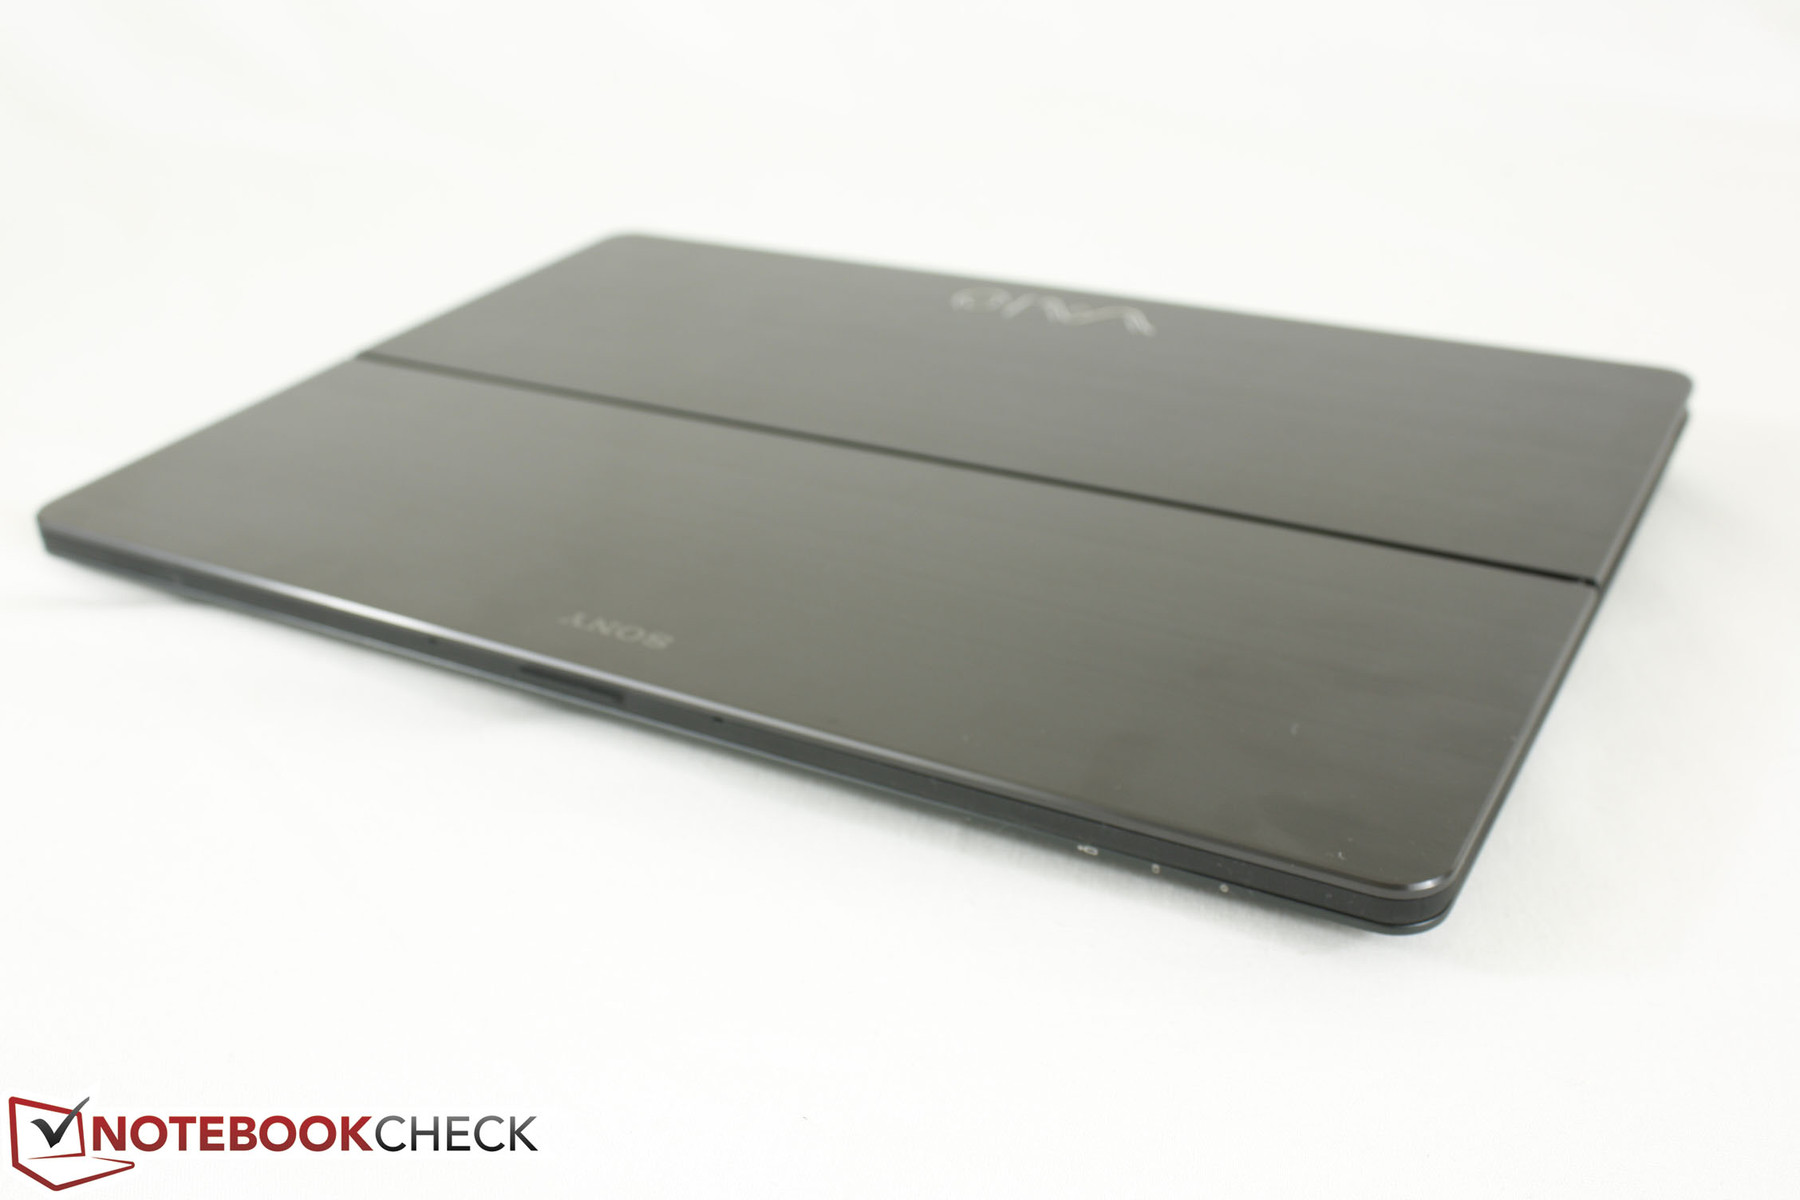 The Vaio Flip 14A completes the Flip series of Sony's 11-inch, 13-inch 